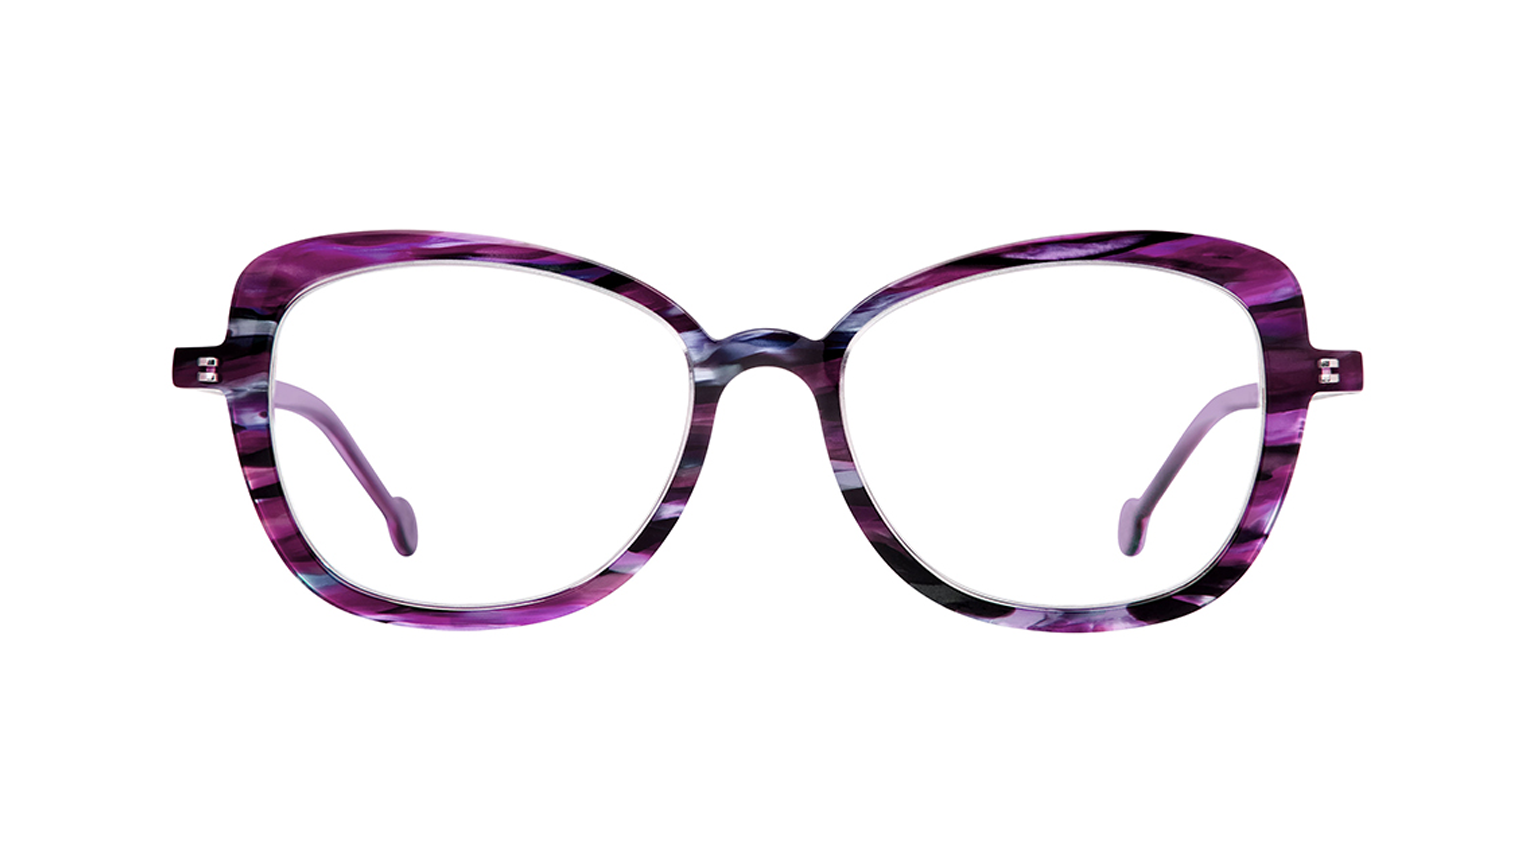 laeyeworks_wren_witchybrew_ss23_e03a21a7-b8ae-4b9d-918b-caeea613535f.png